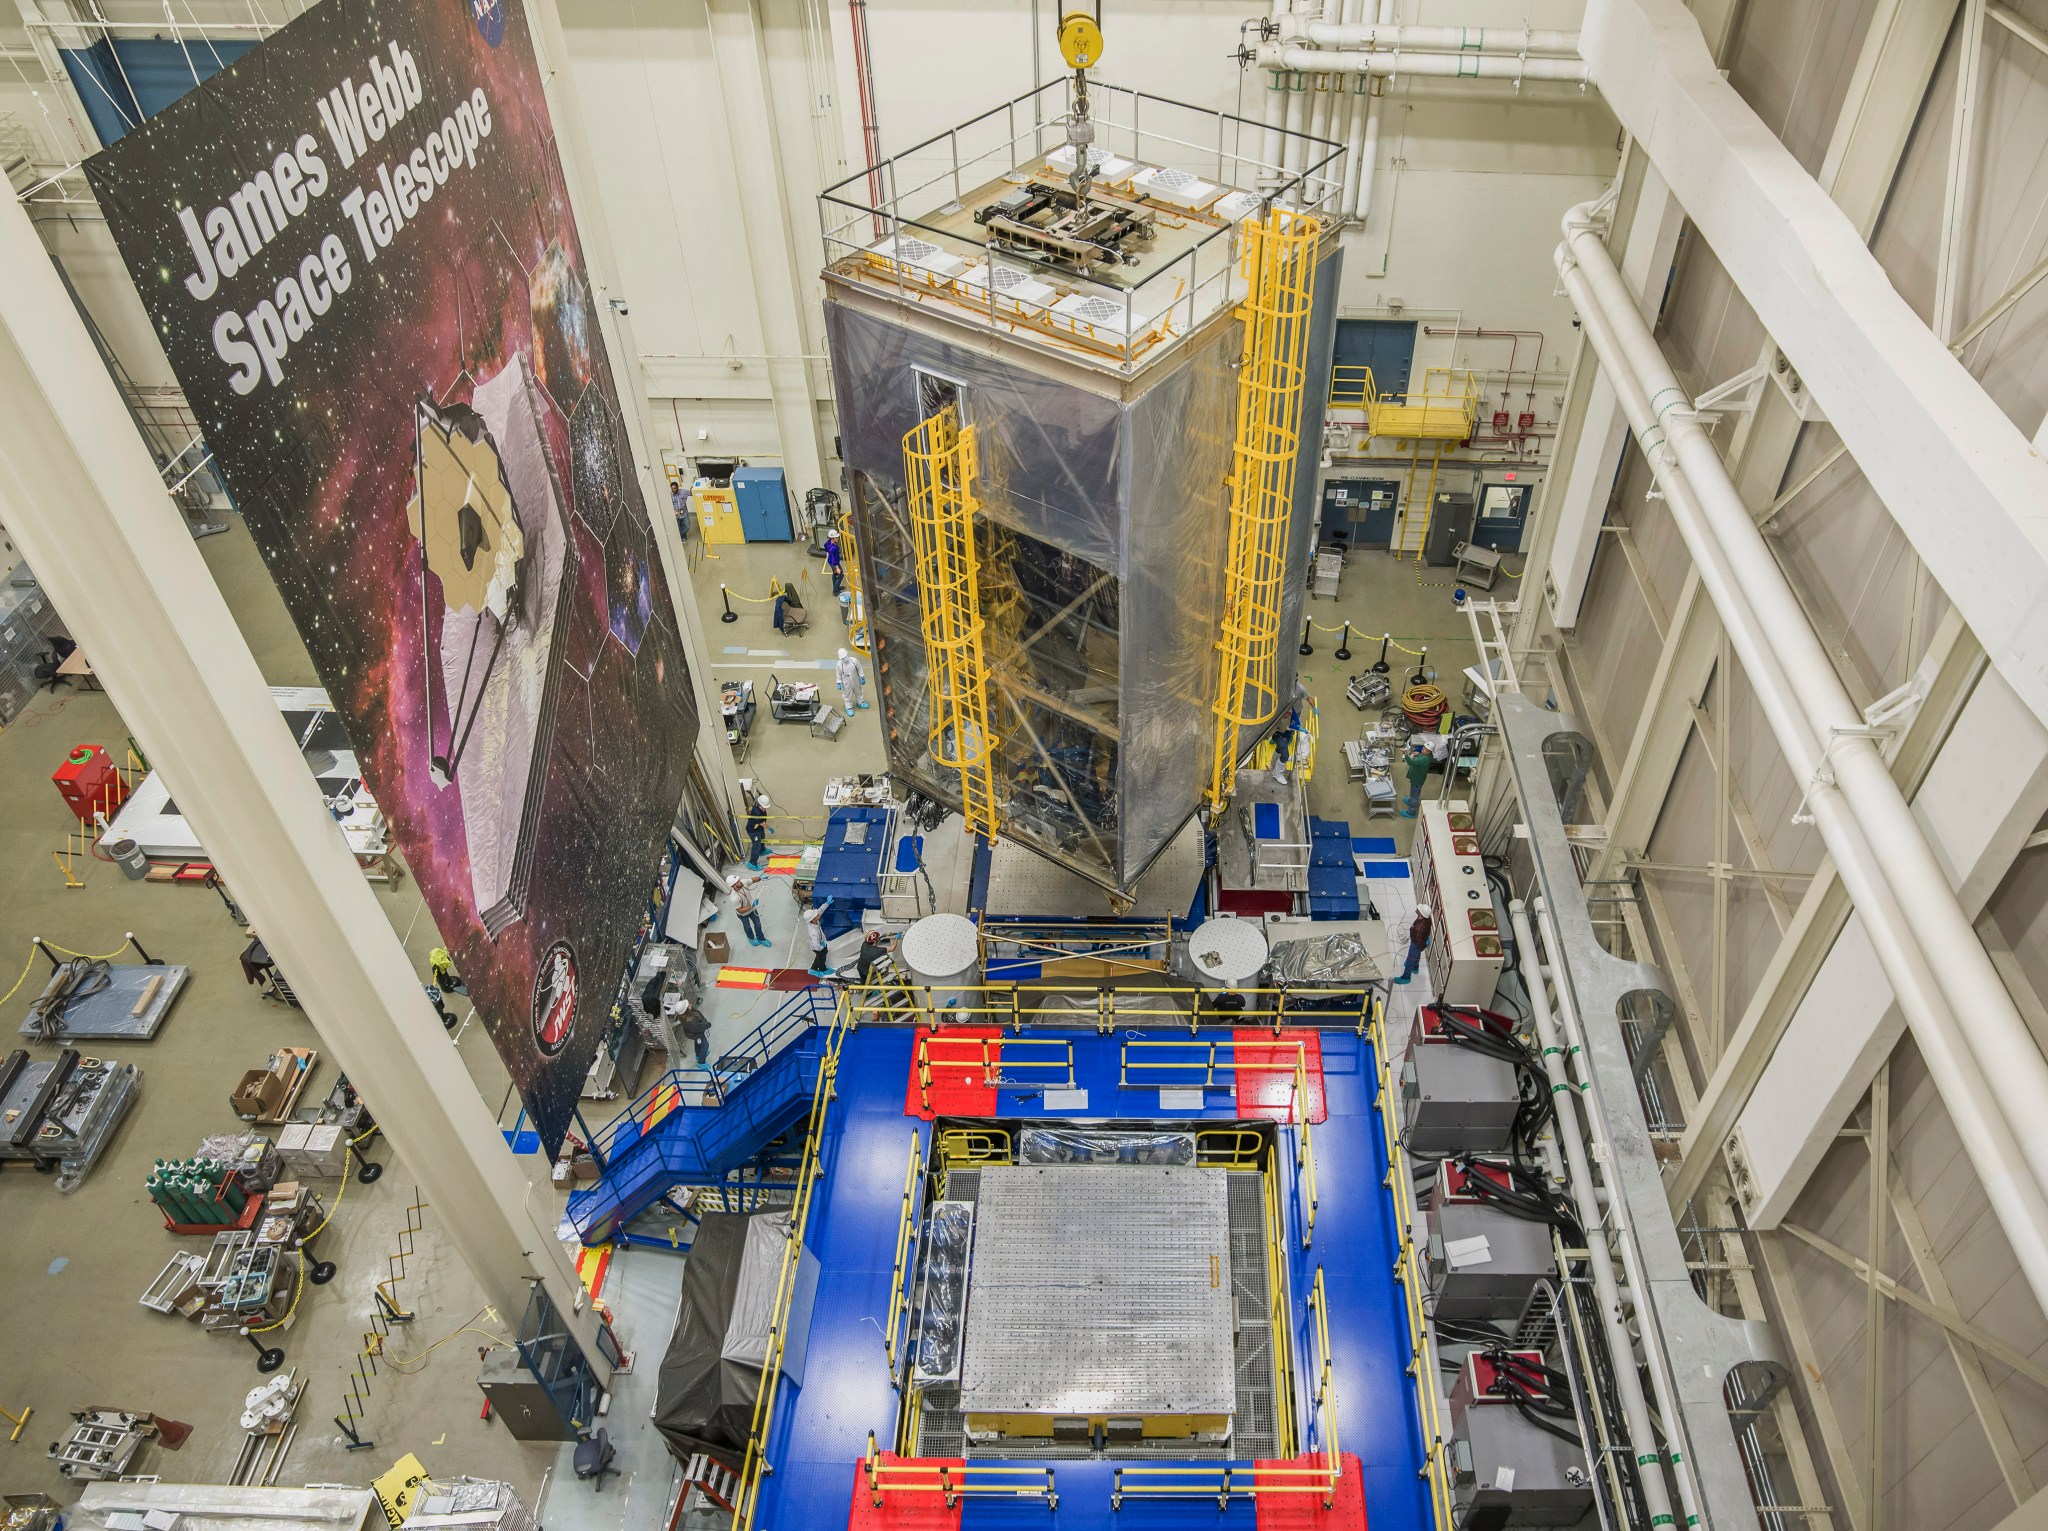 NASA engineers and technicians perform vibration testing on the James Webb Space Telescope.